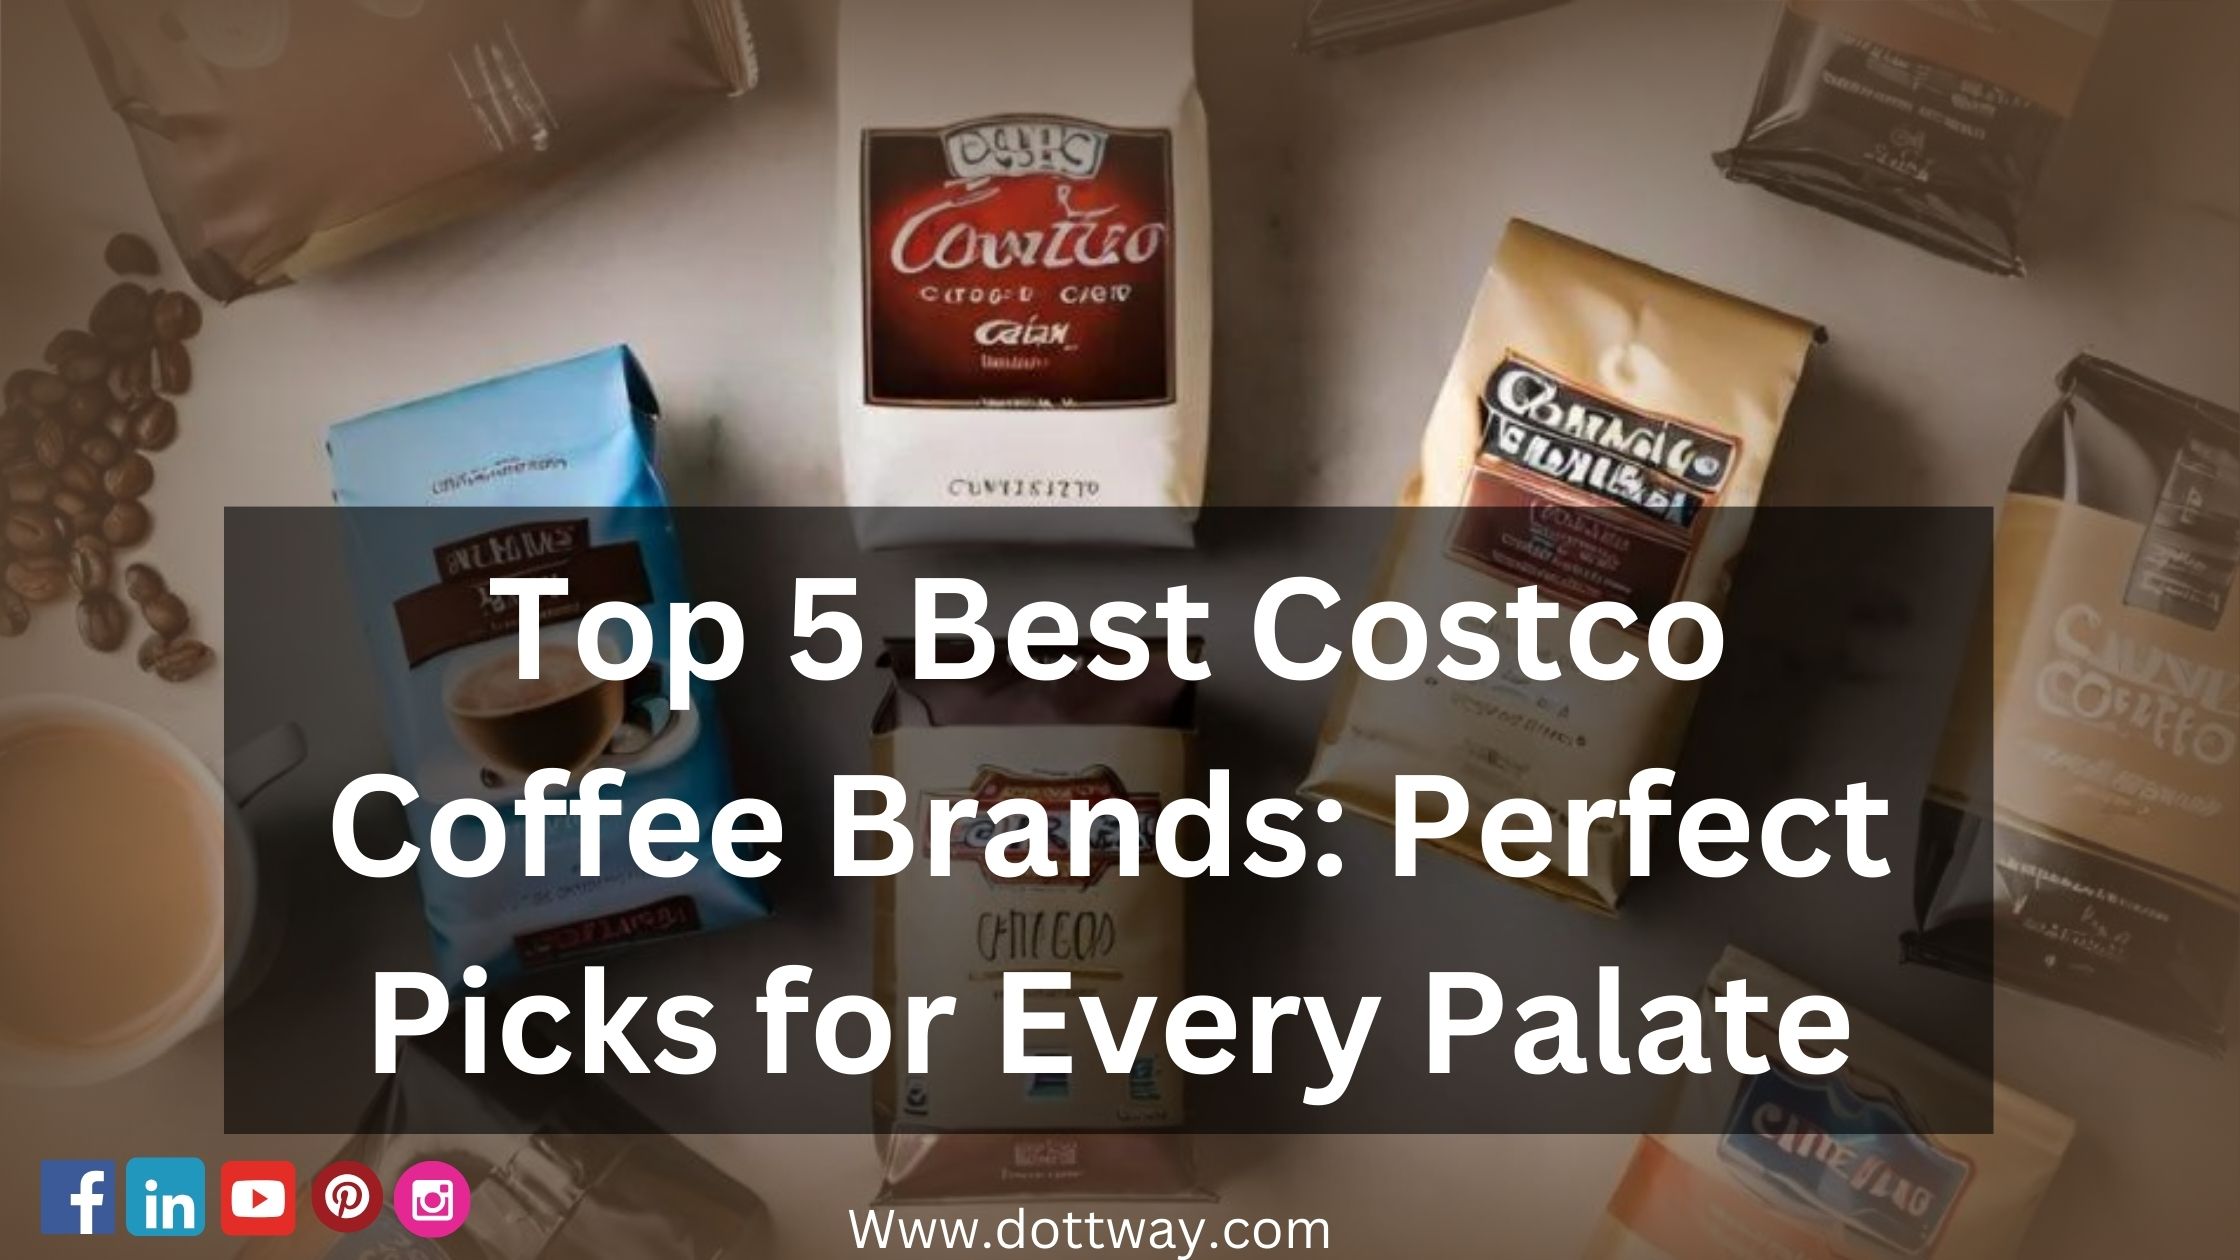 Top 5 Best Costco Coffee Brands: Perfect Picks for Every Palate